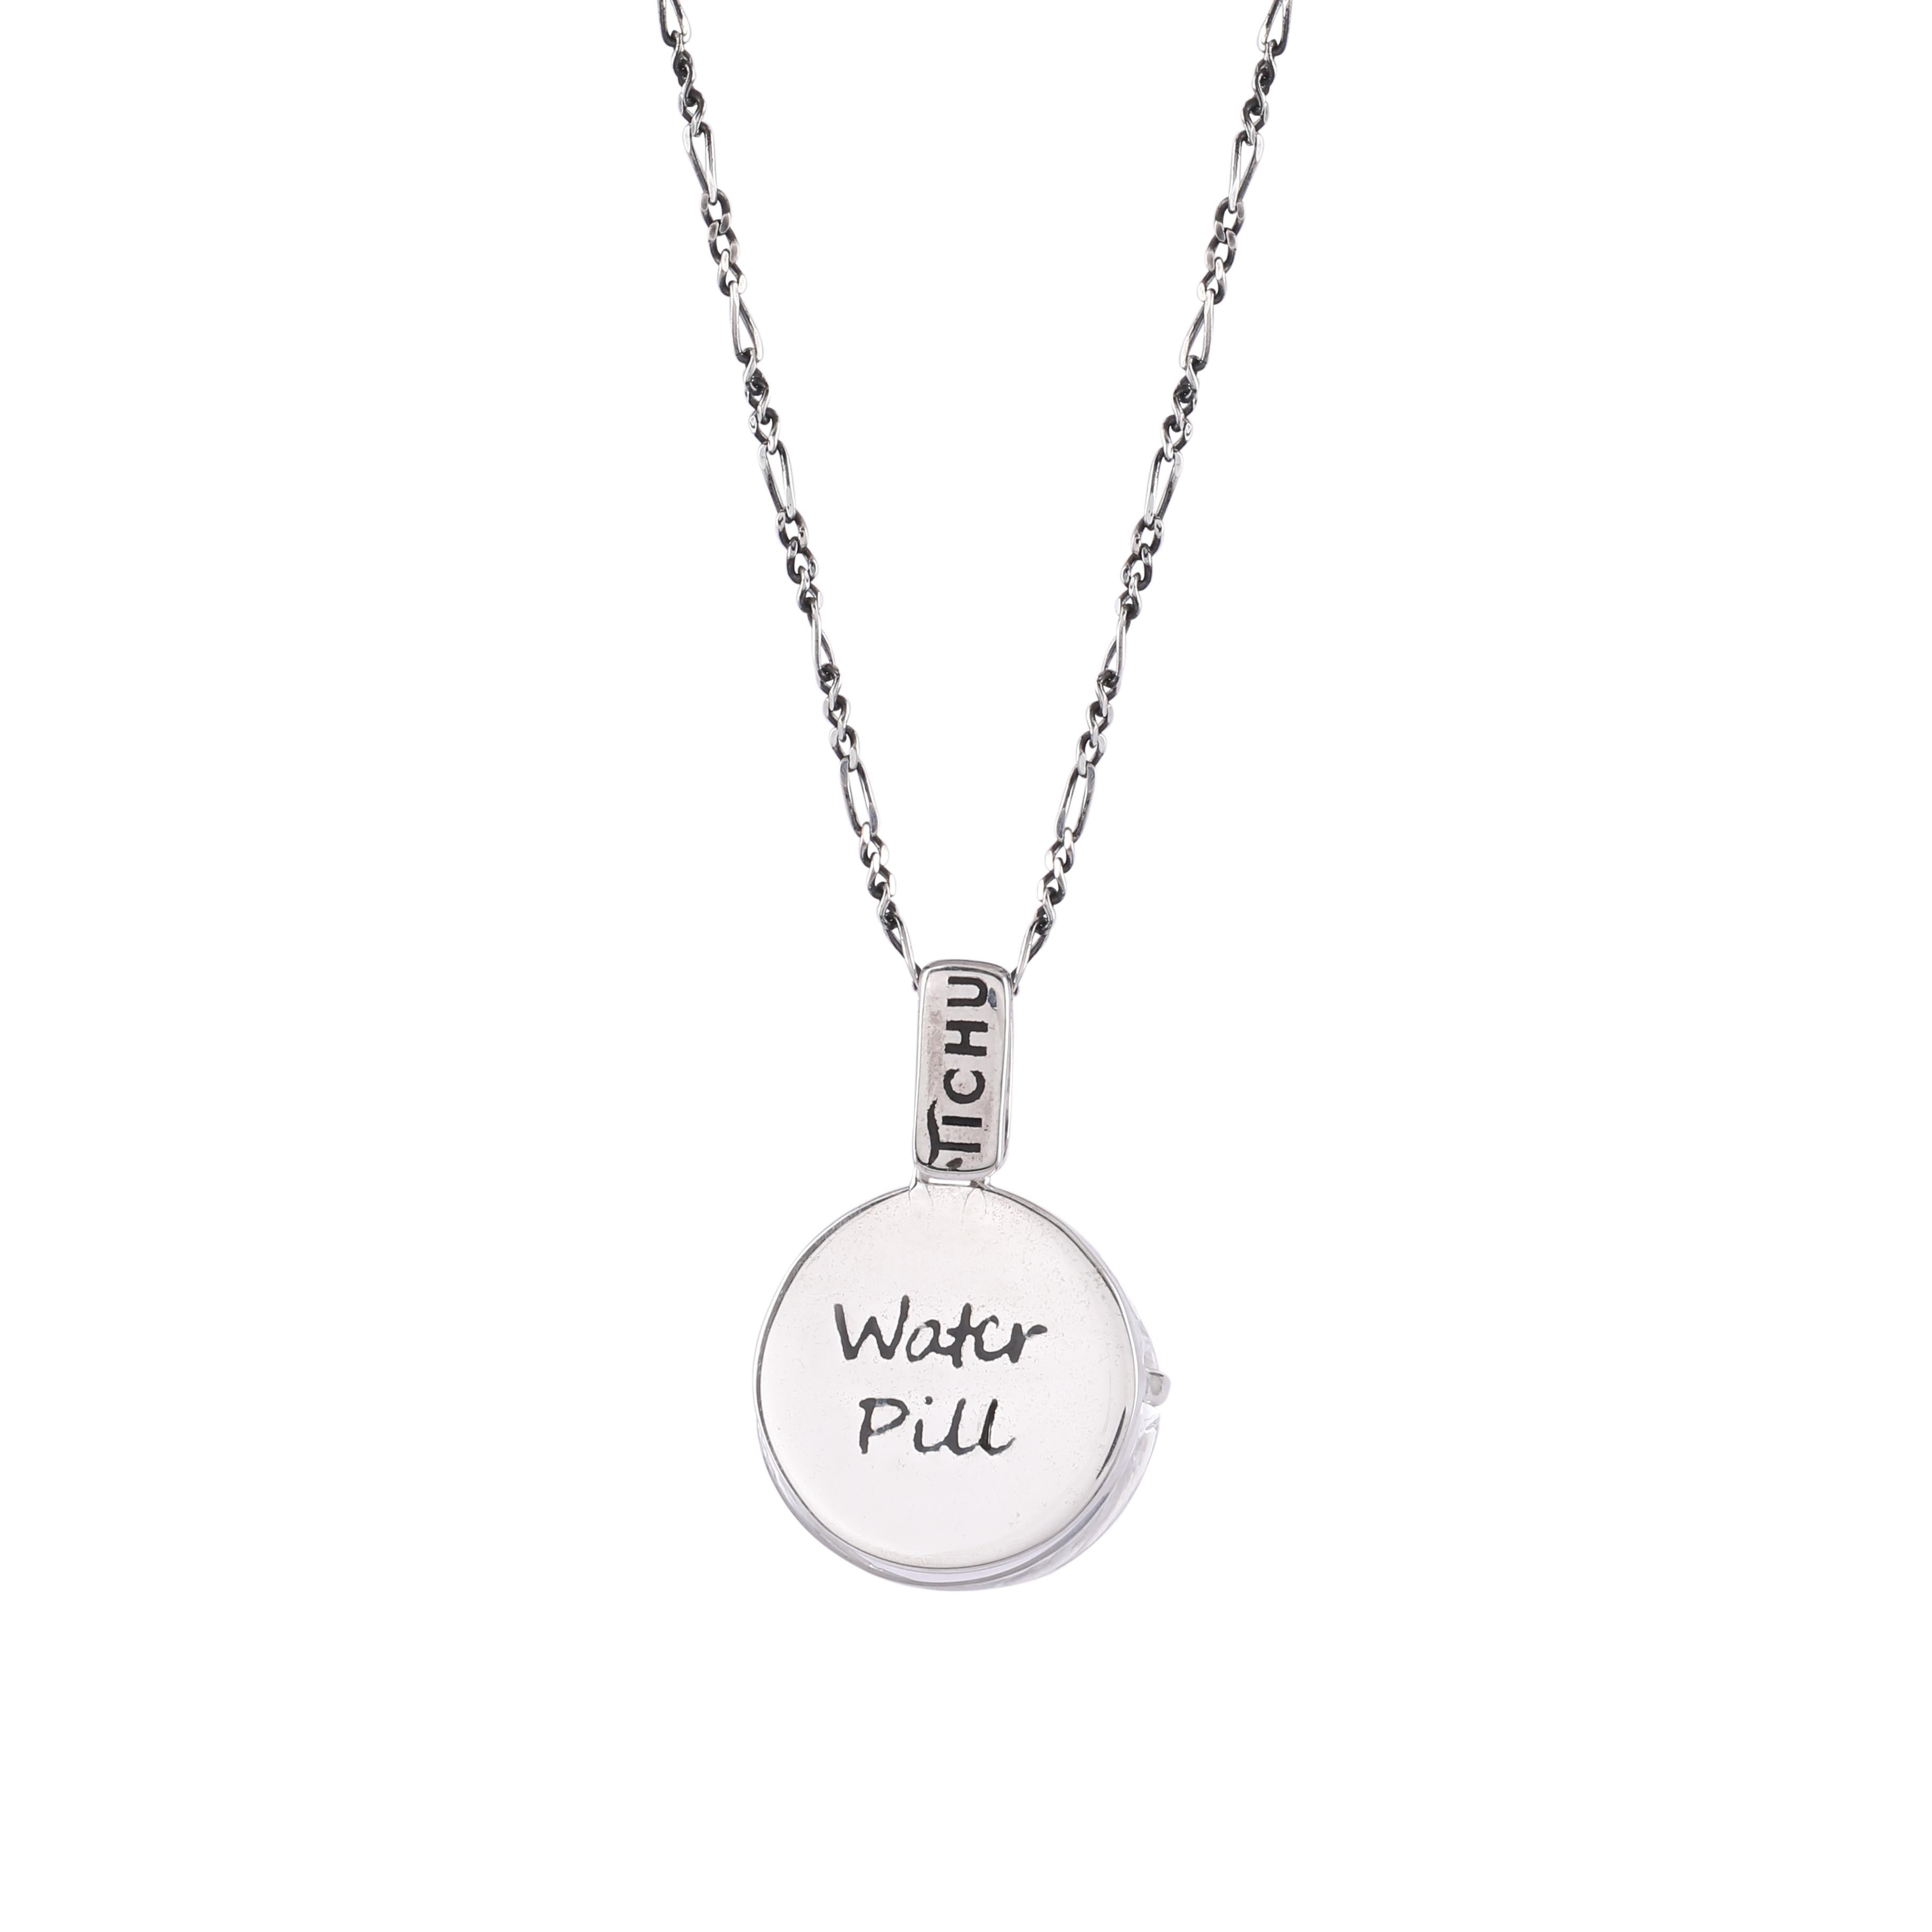 Water is highly vital for all known forms of life. With the presence of the crystal, the Aqua Pill will help cleanse your body, just like water.

Each Water Pill Pendant is handcrafted in Sterling Silver, specially Pill cut Crystal Quartz. The use